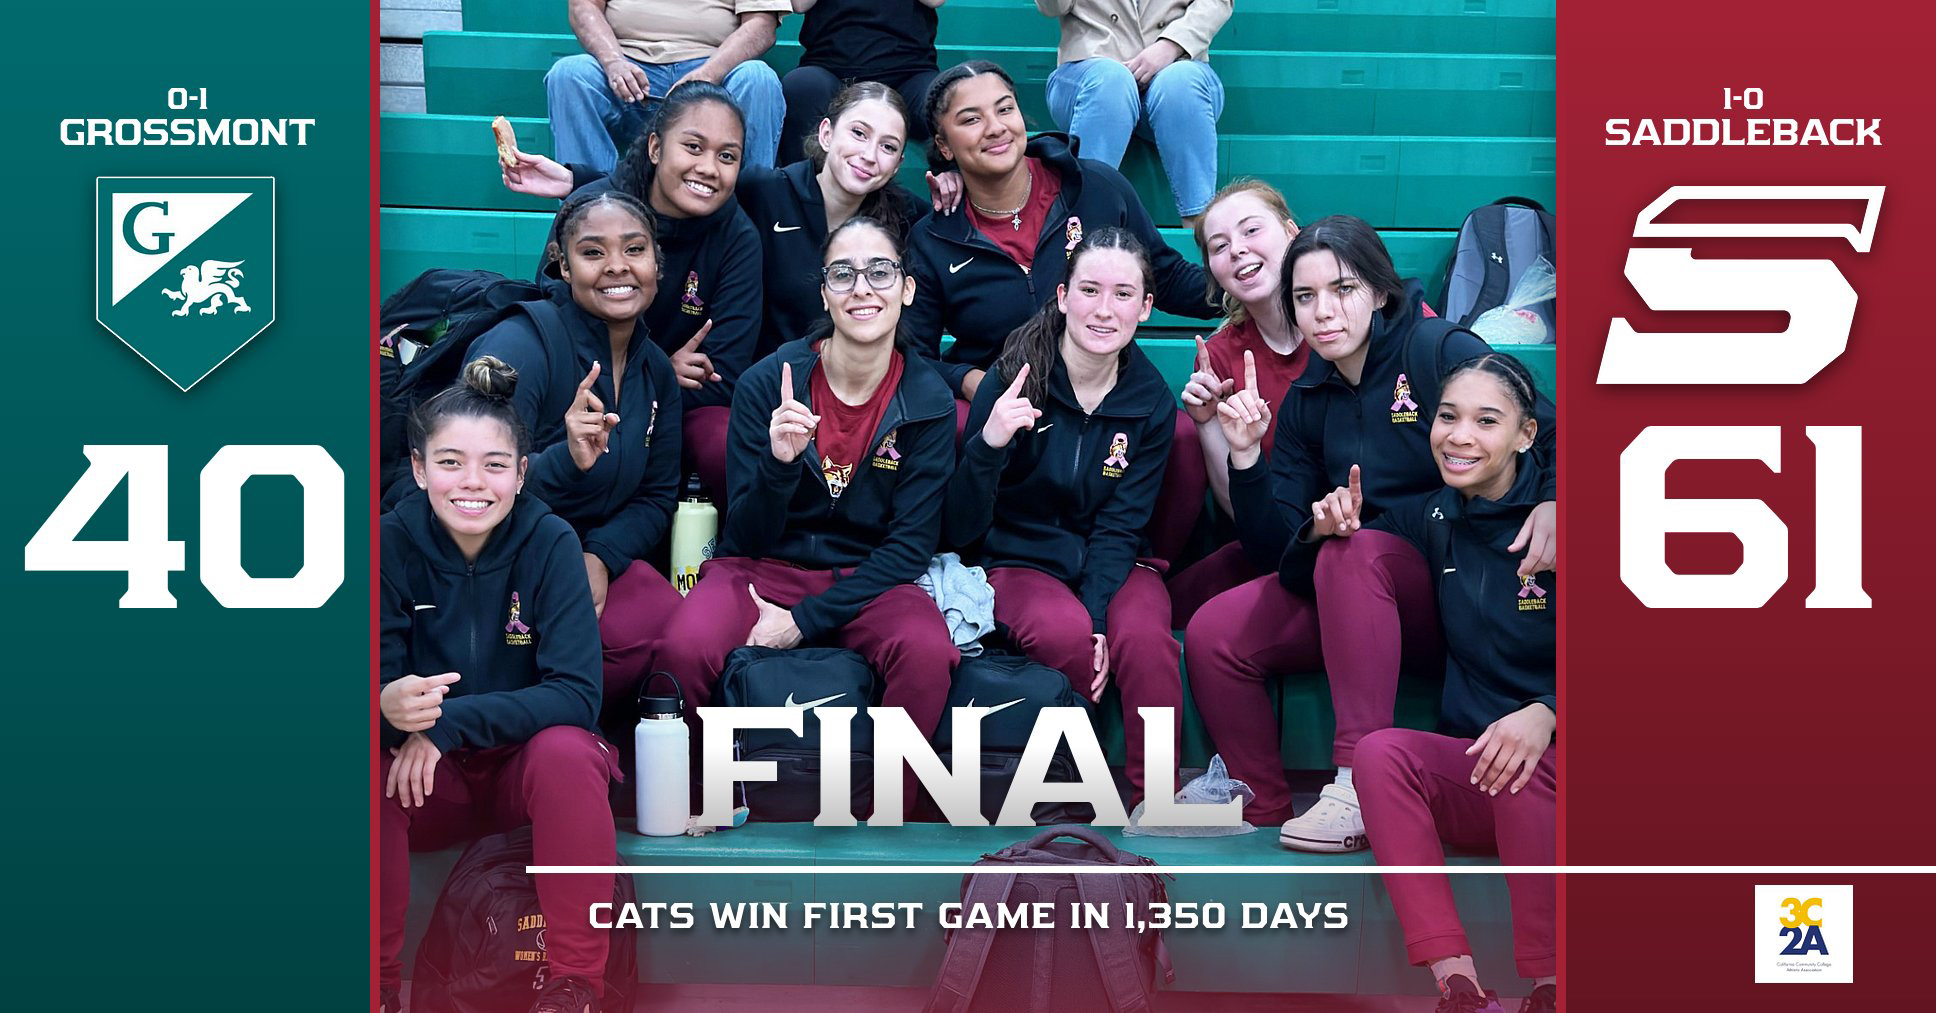 Bobcats win first game in 1,350 days